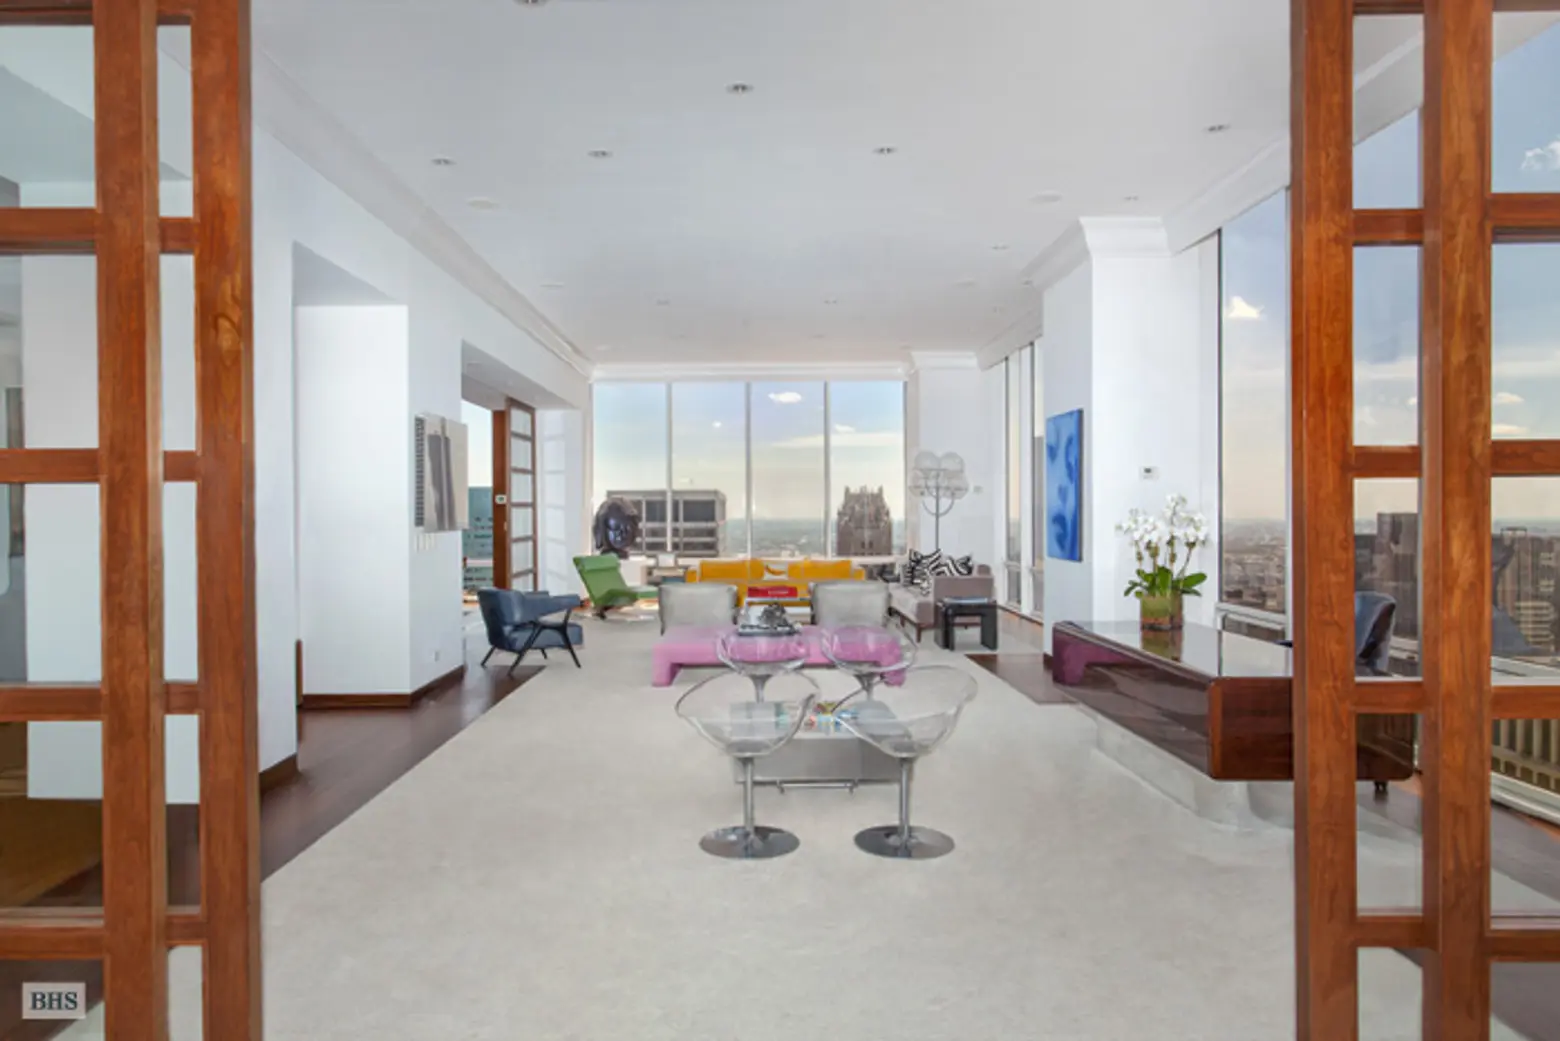 641 Fifth Avenue, Olympic Tower, Gucci penthouse, Alessandra and Allegra Gucci, midtown penthouse